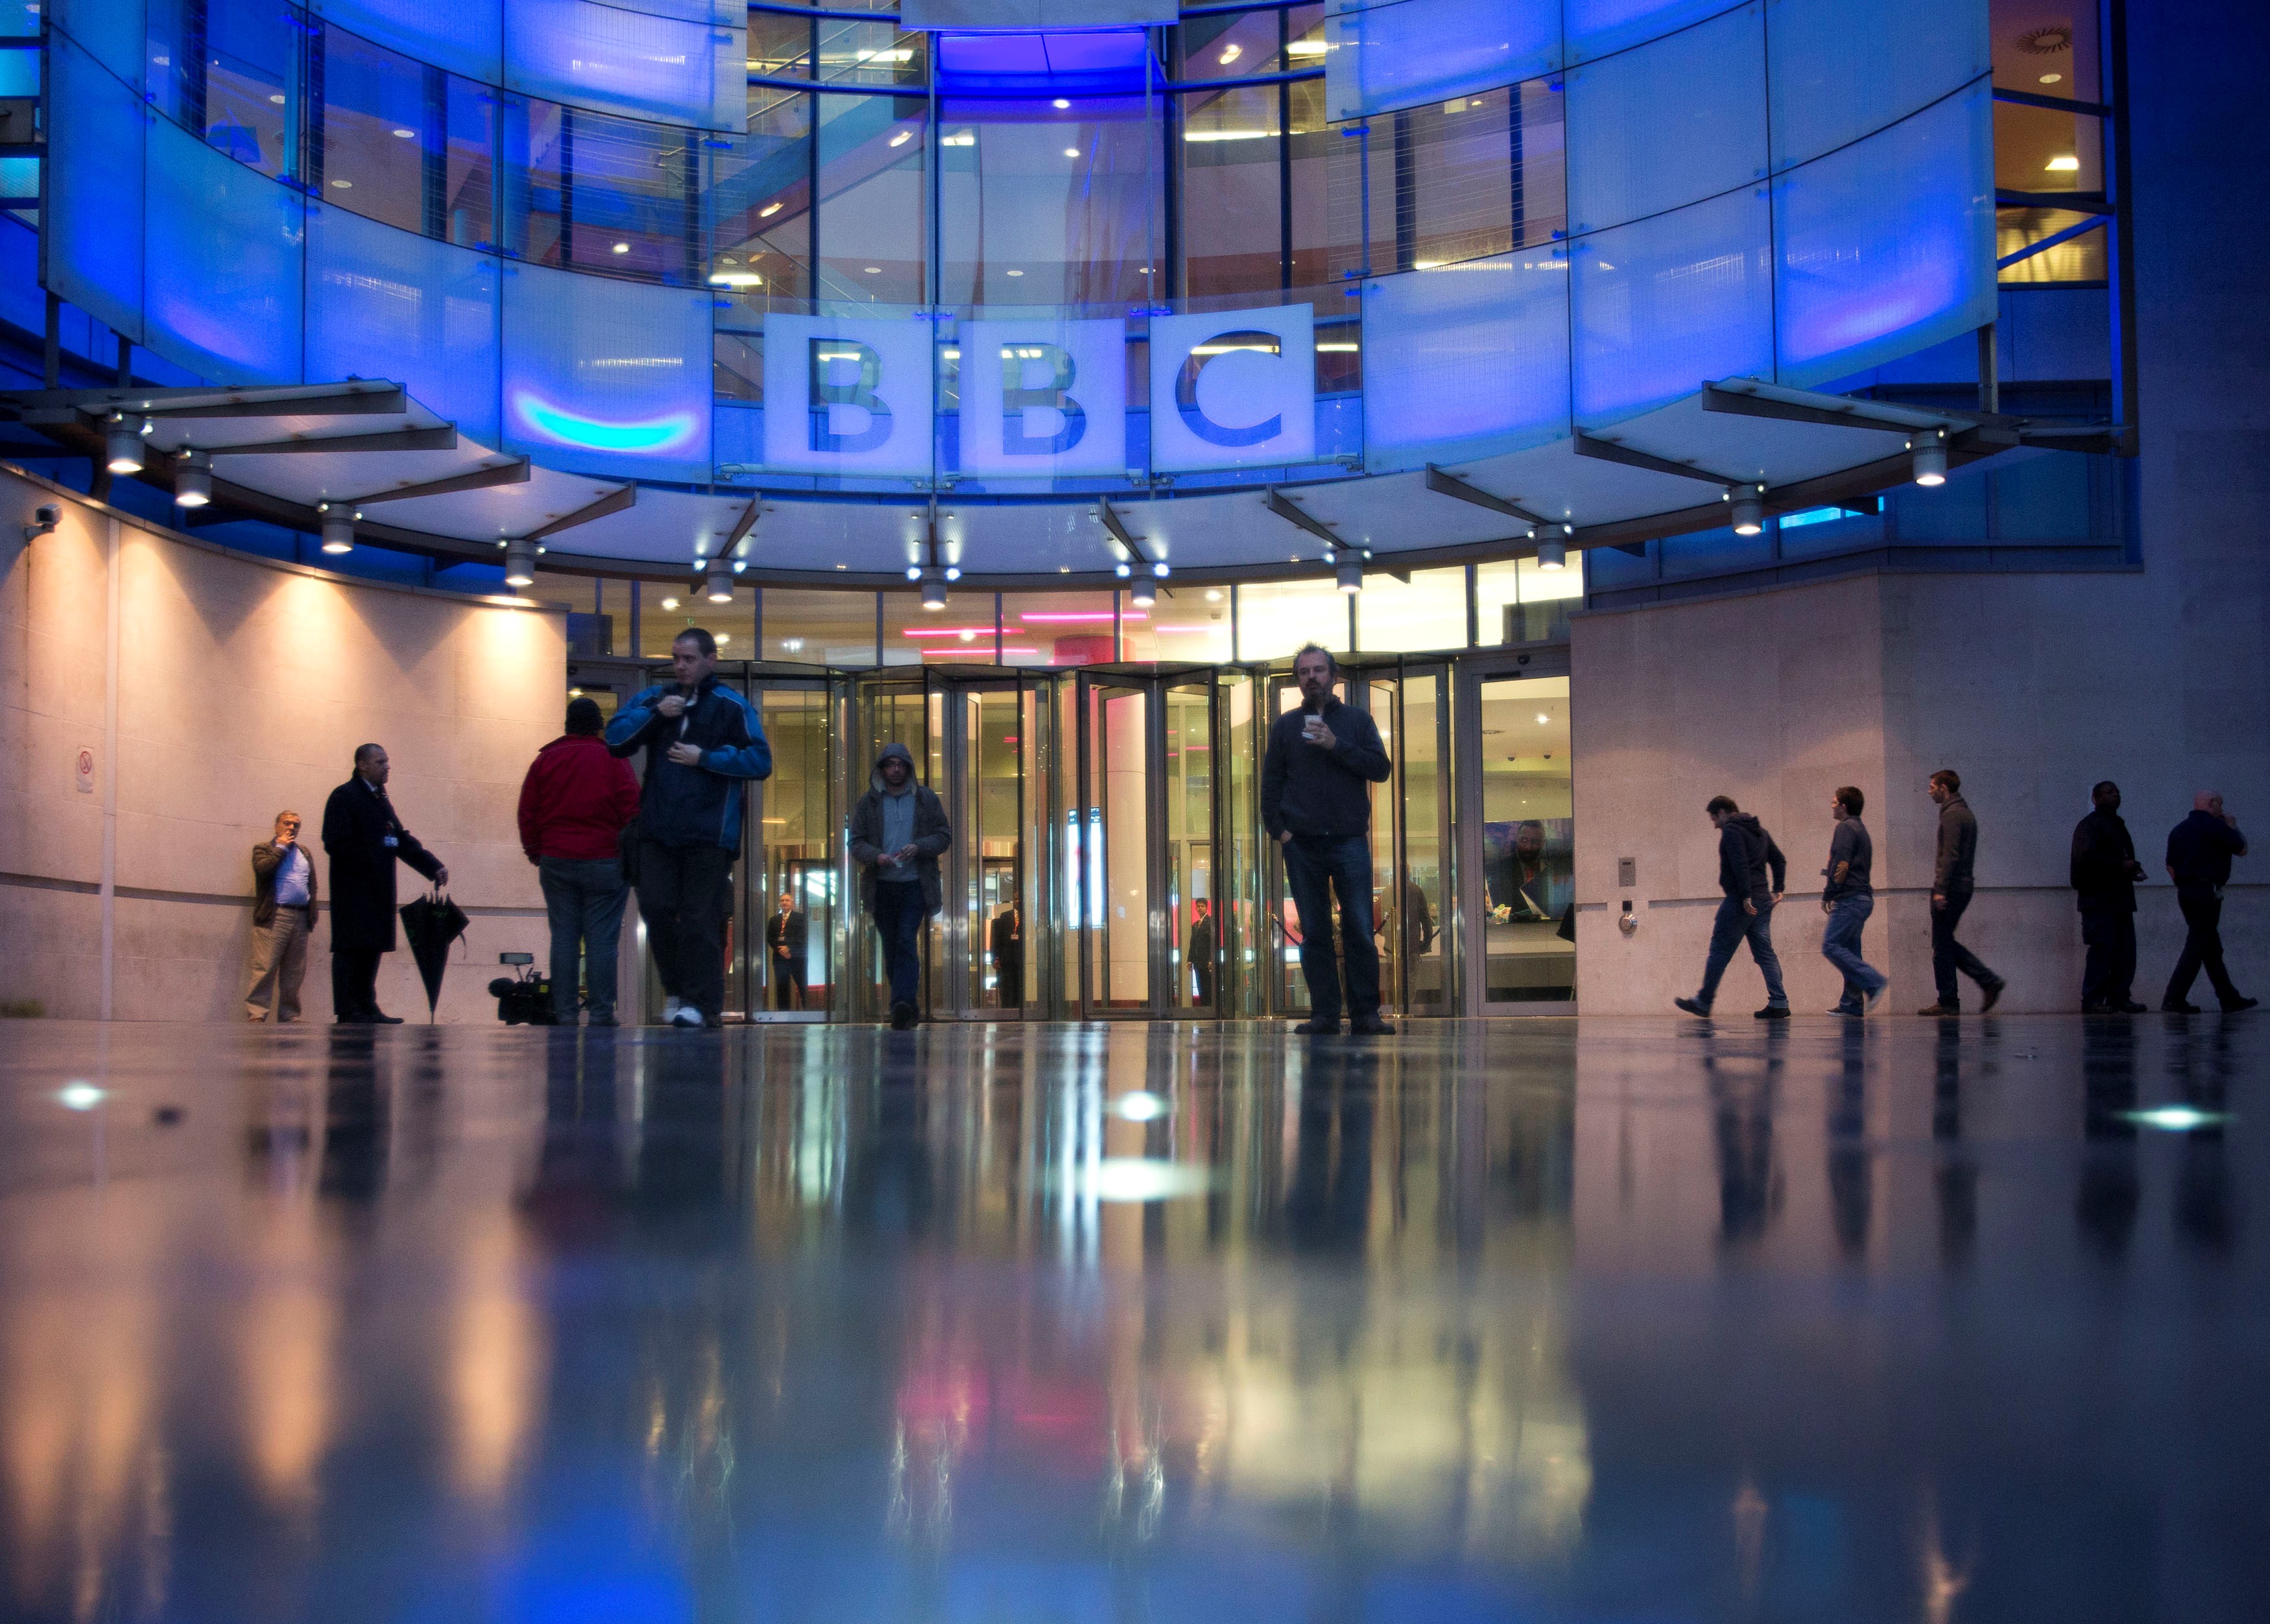 People arrive at, and leave, the BBC headquarters (Reuters)